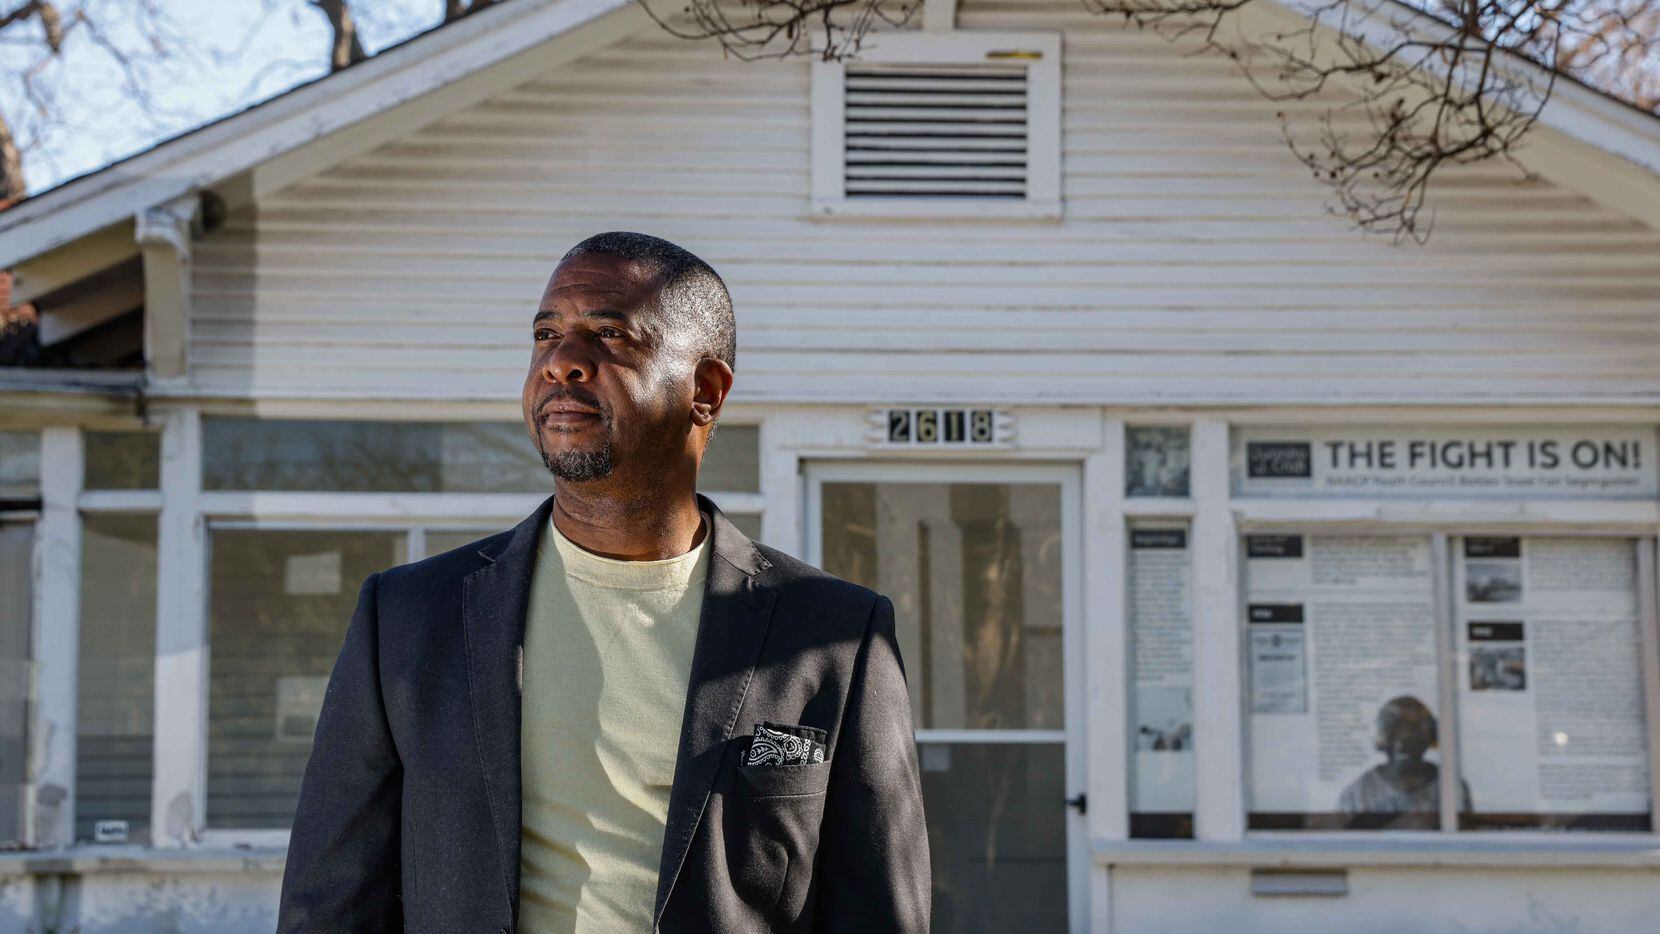 John Spriggins, shown in front of the historic Juanita Craft house in South Dallas, is manager of the South Dallas Cultural Center, which is overseeing work to restore the home where Craft, a noted Black civil-rights leader, once lived.